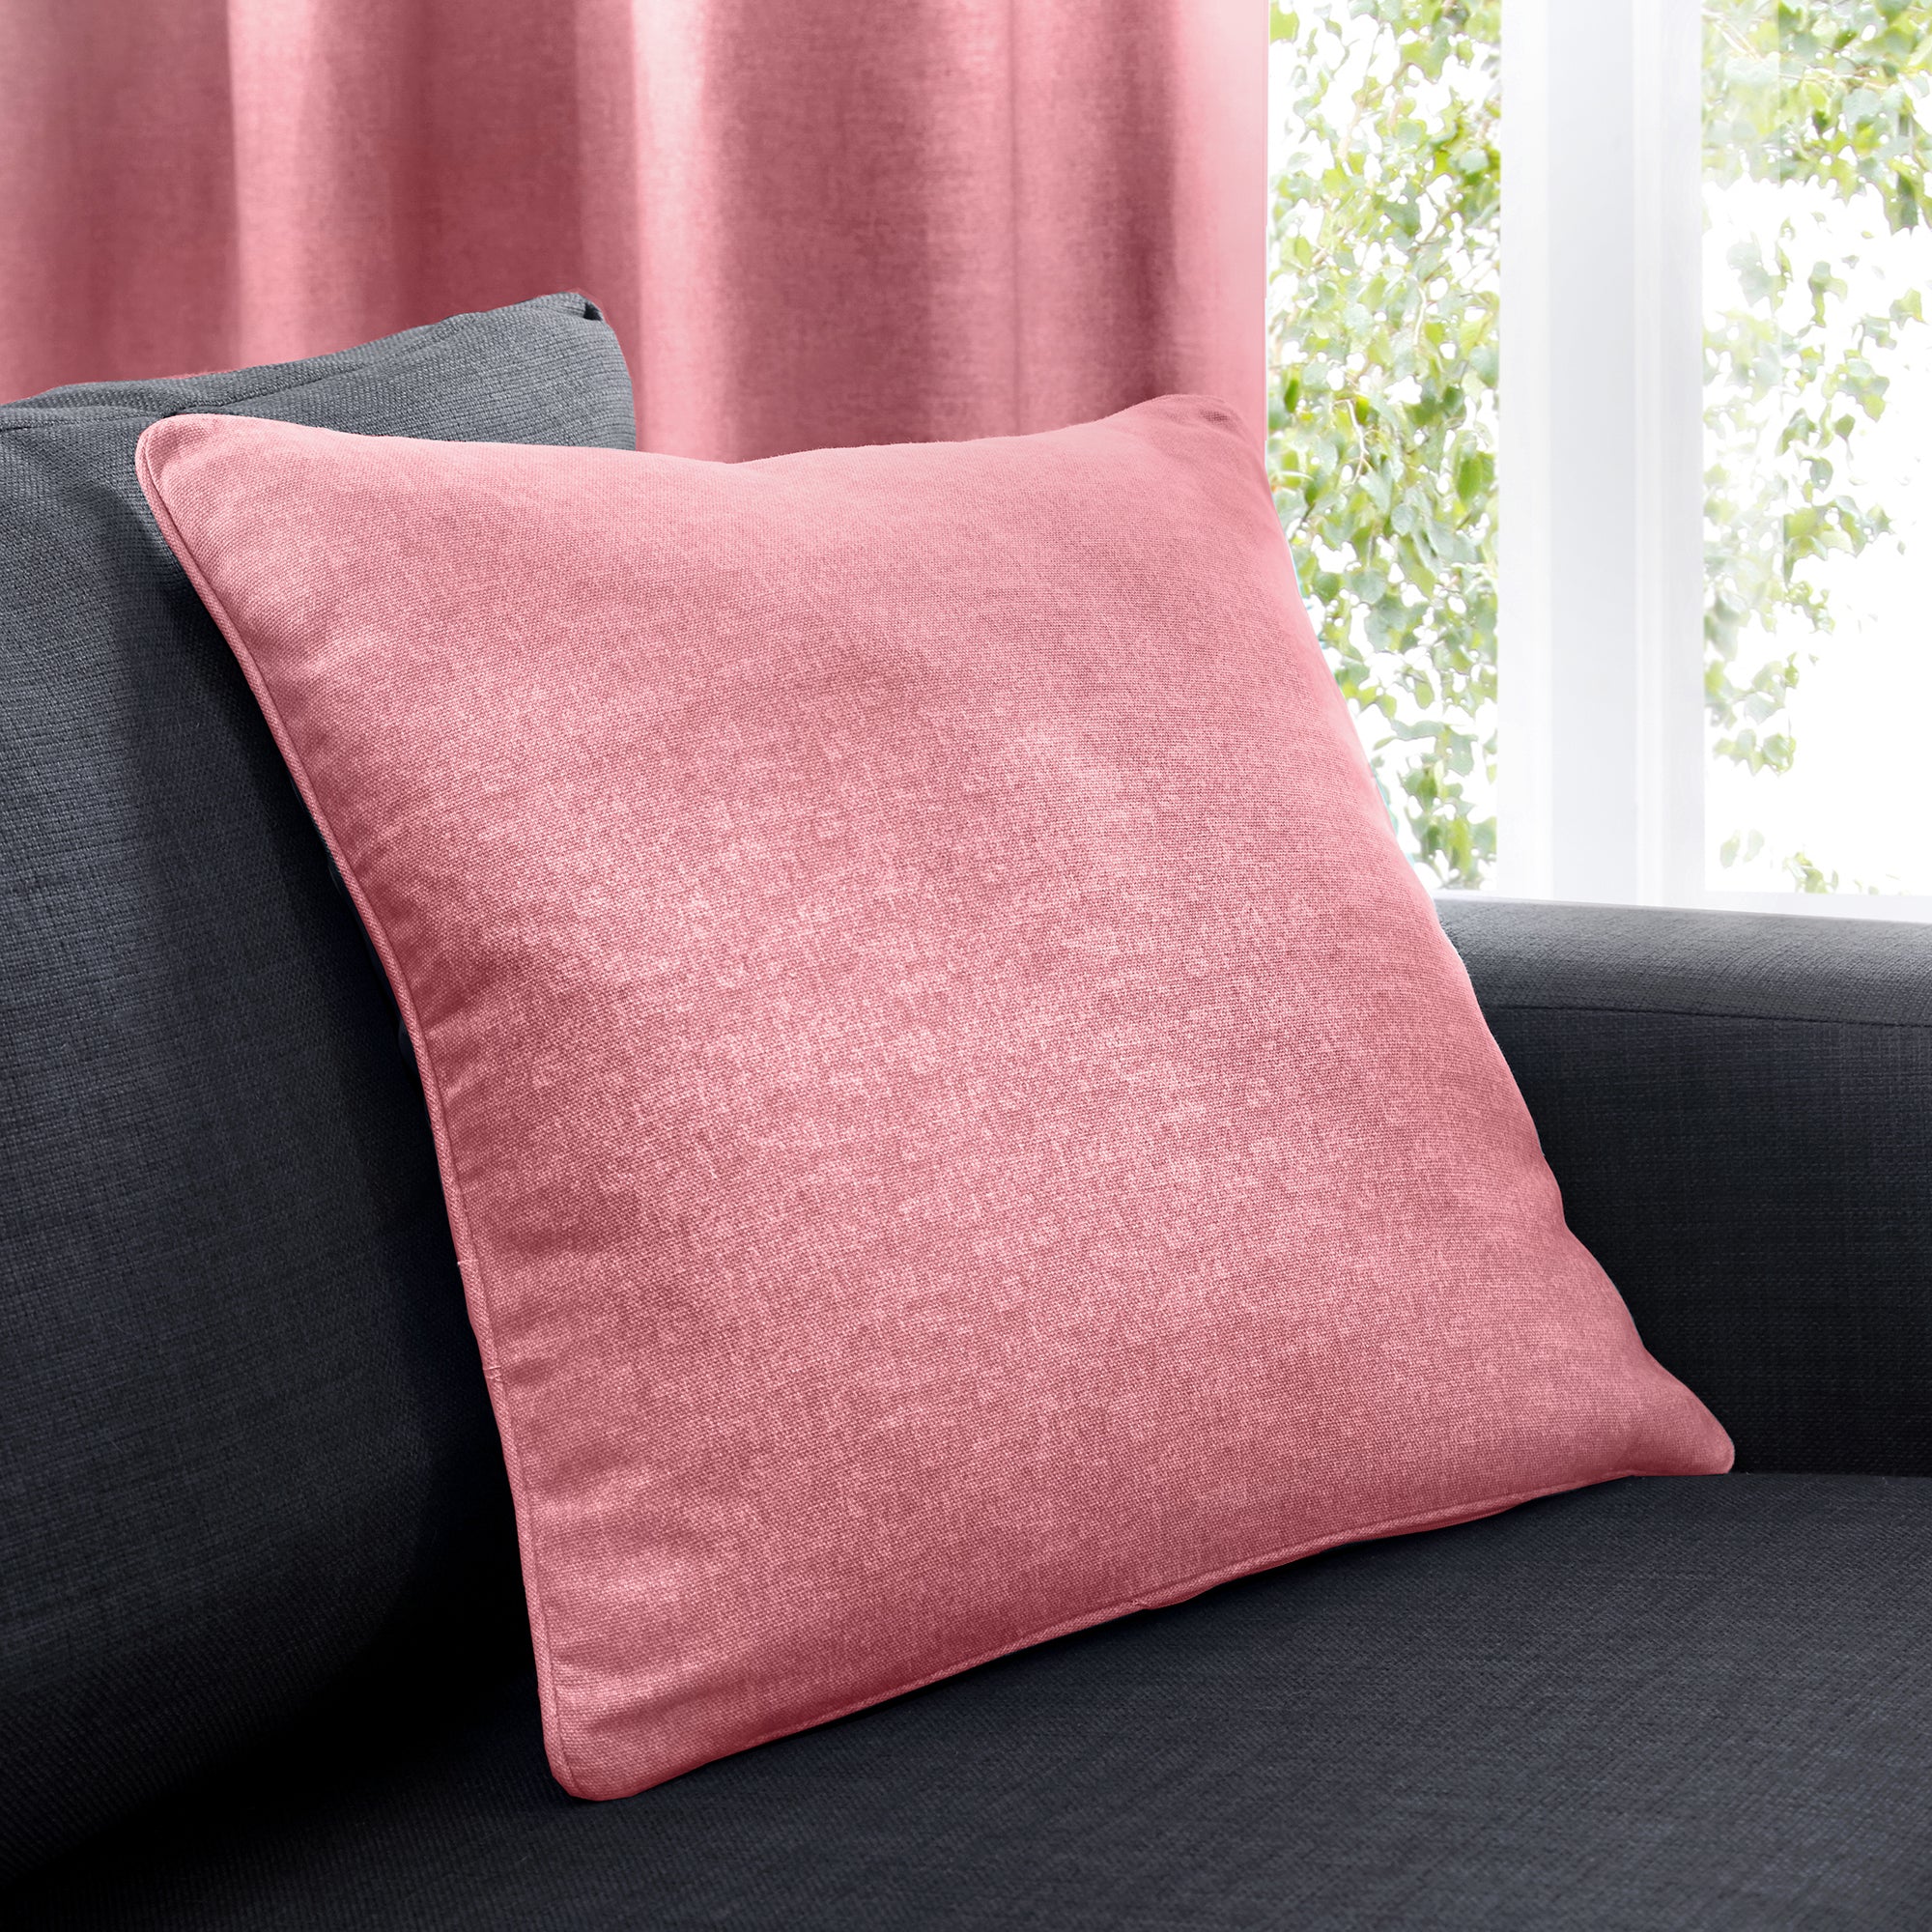 Sorbonne - 100% Cotton Filled Cushion in Blush - by Fusion